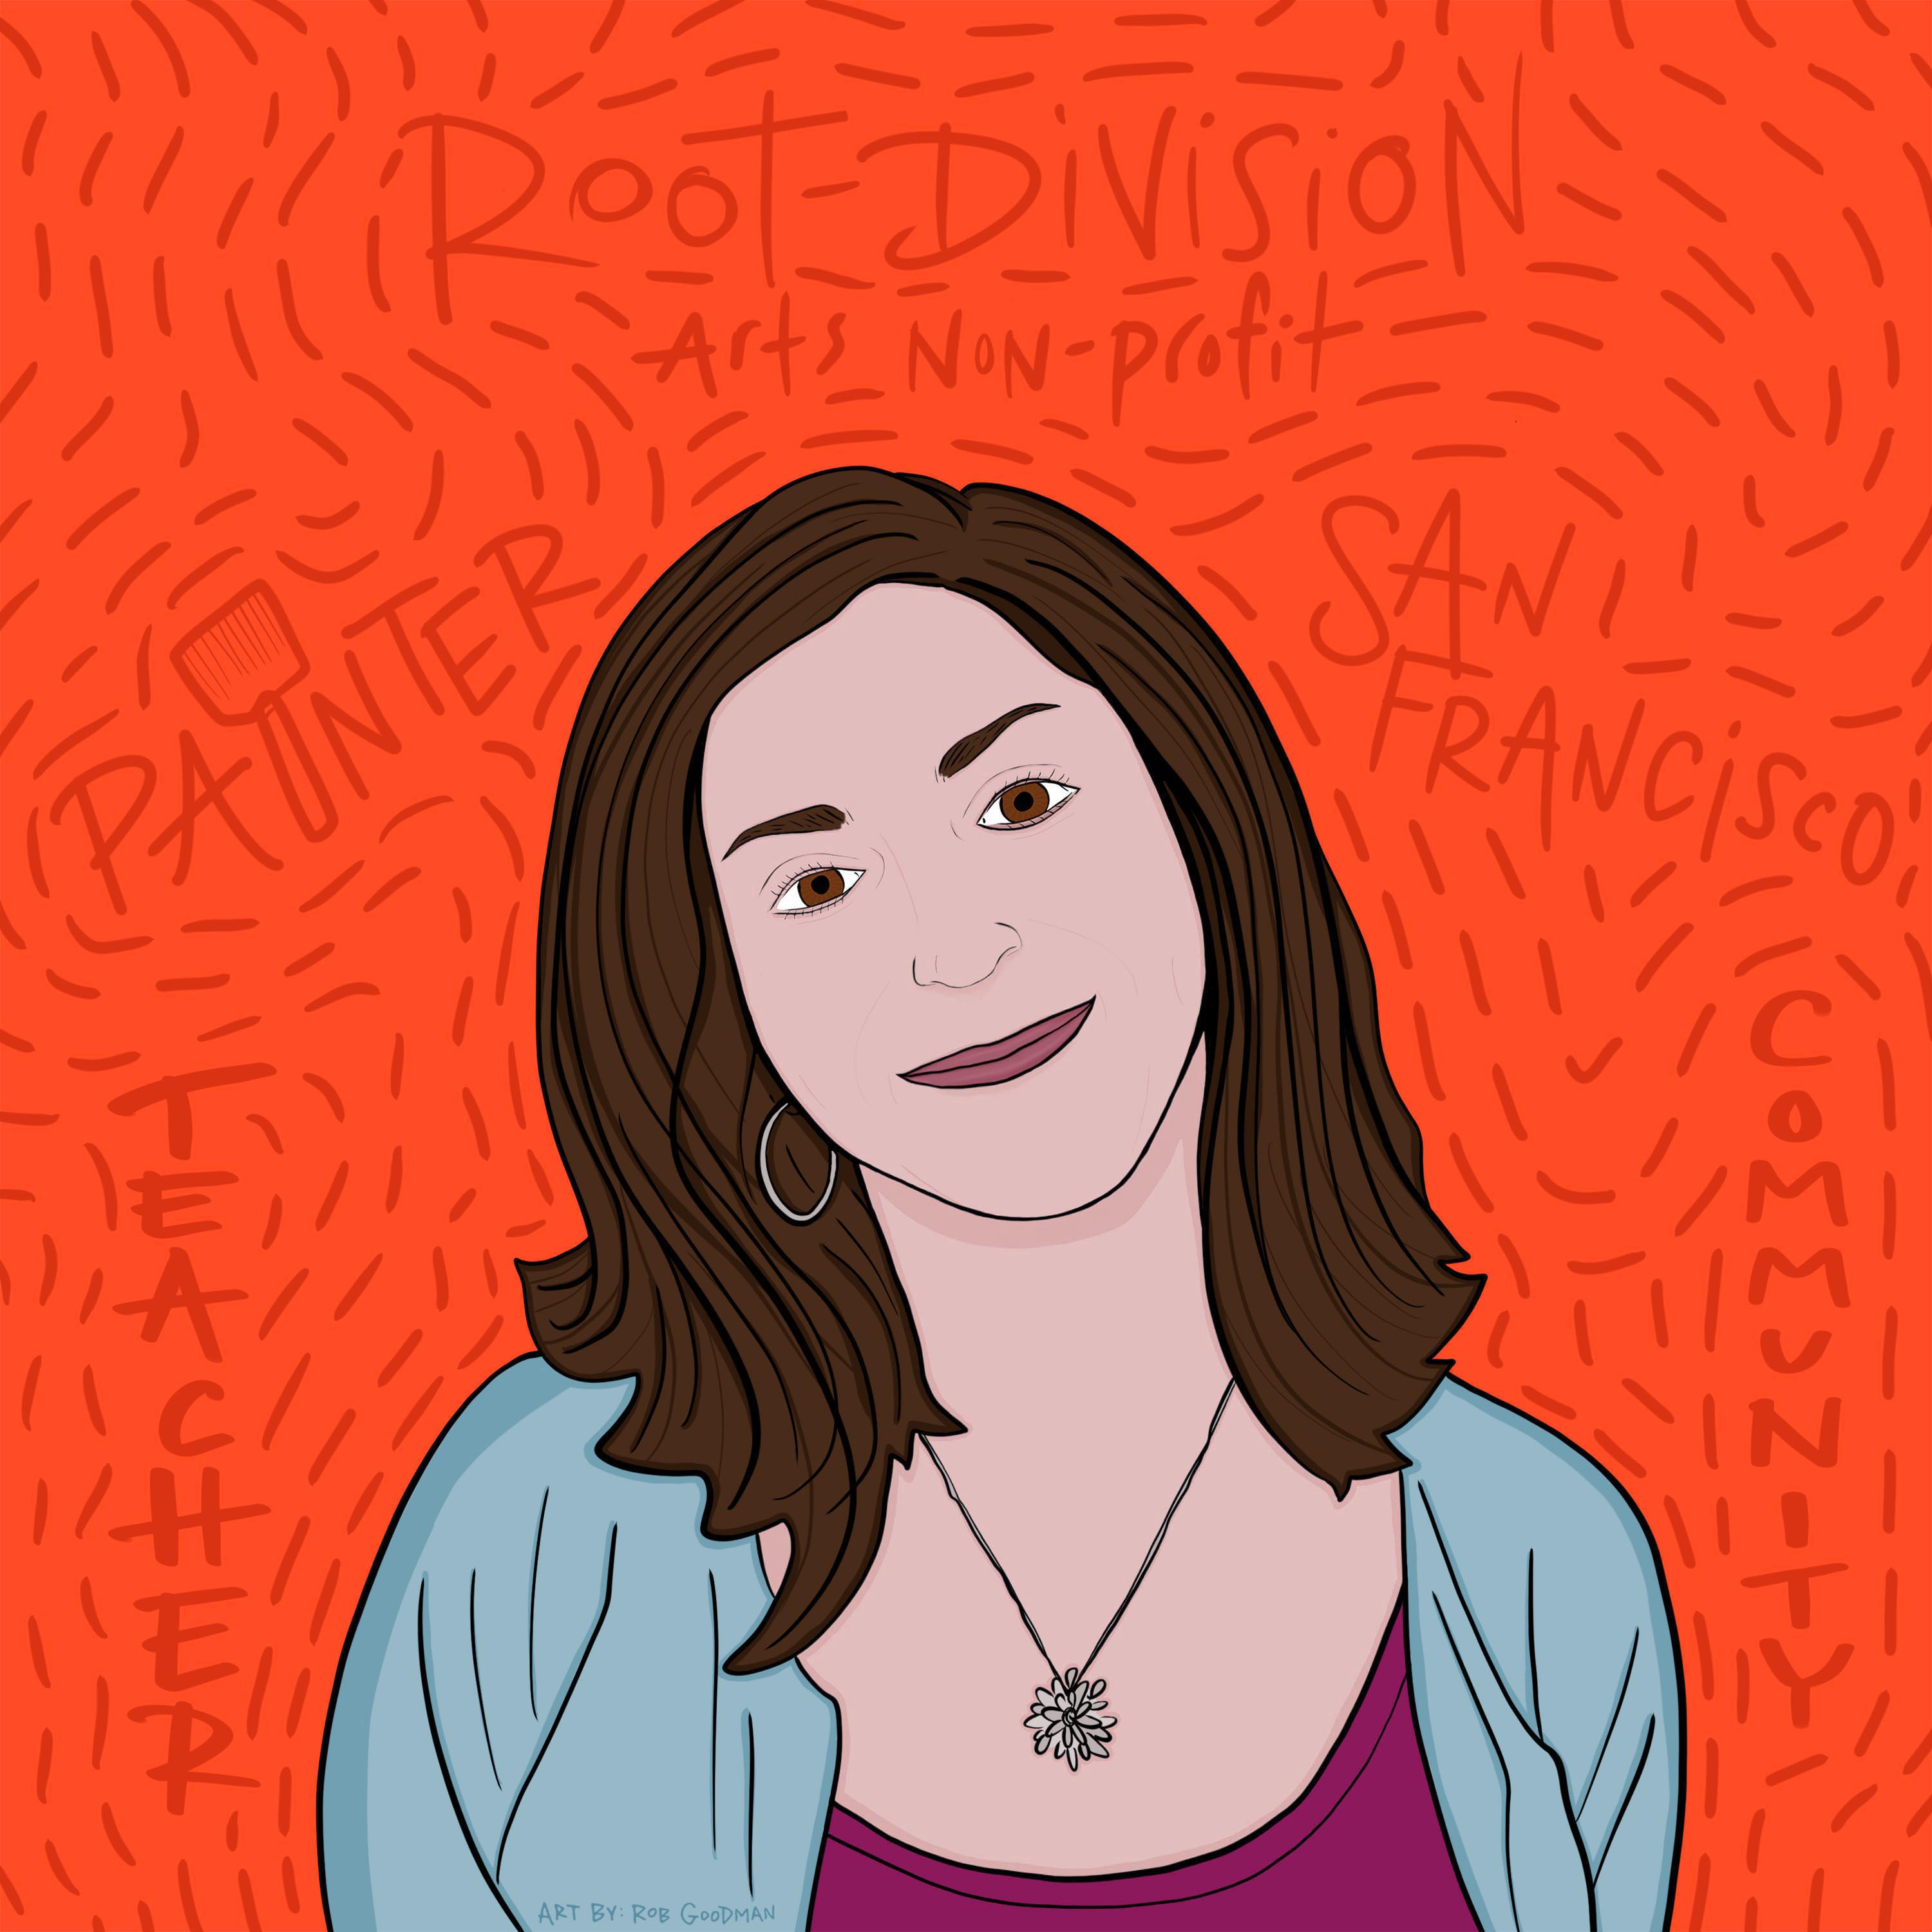 Michelle Mansour, Artist, Educator, and Executive Director of Root Division